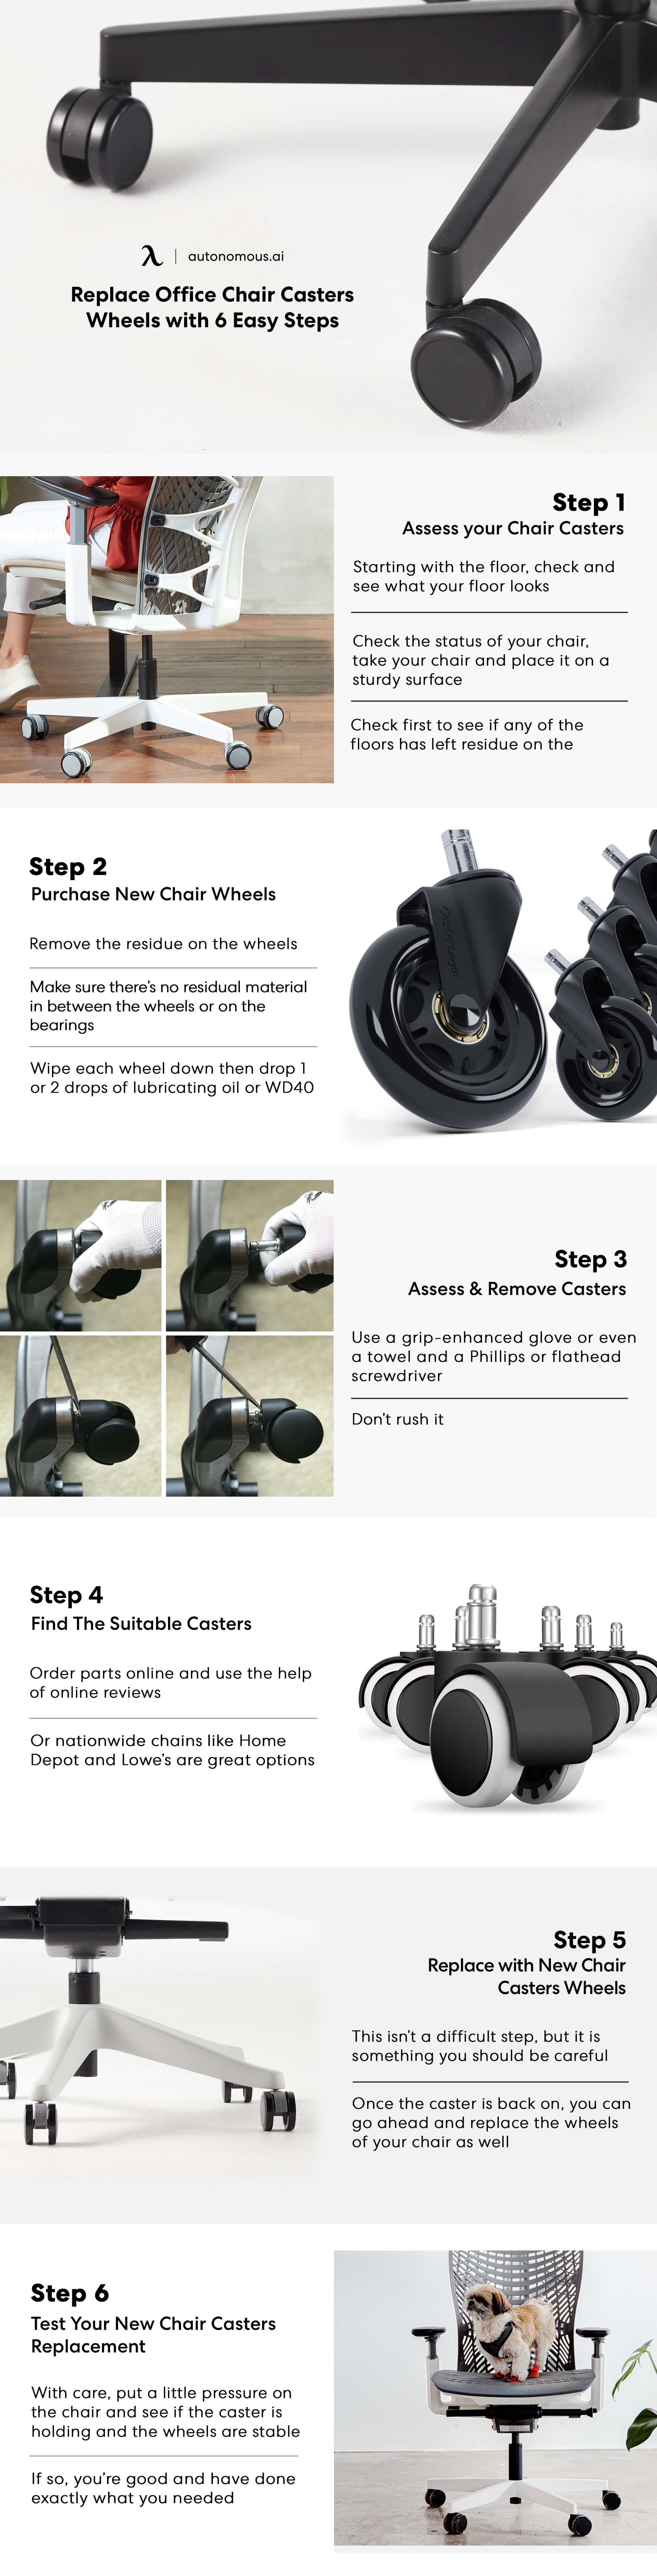 Venta Office Chair Wheel Assembly, How To Replace Office Chair Wheels